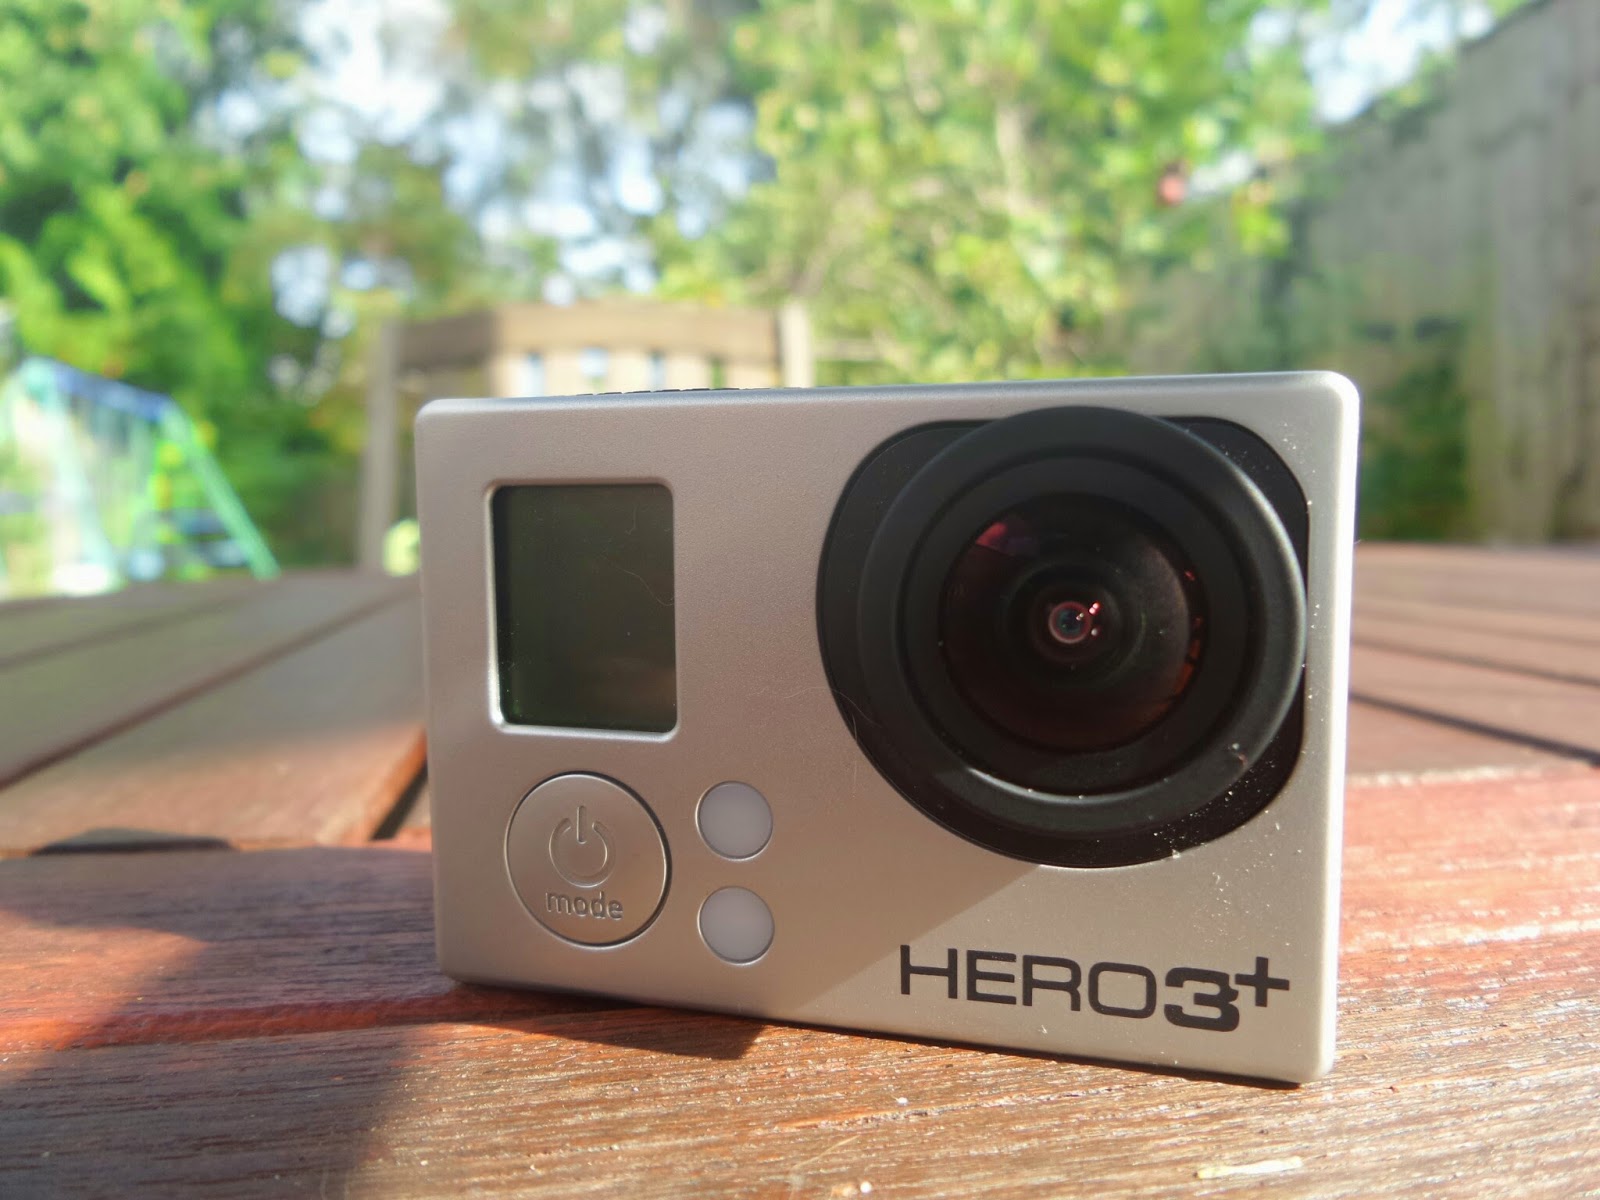 GoPro Hero3+ - should you buy one? Yes you should.